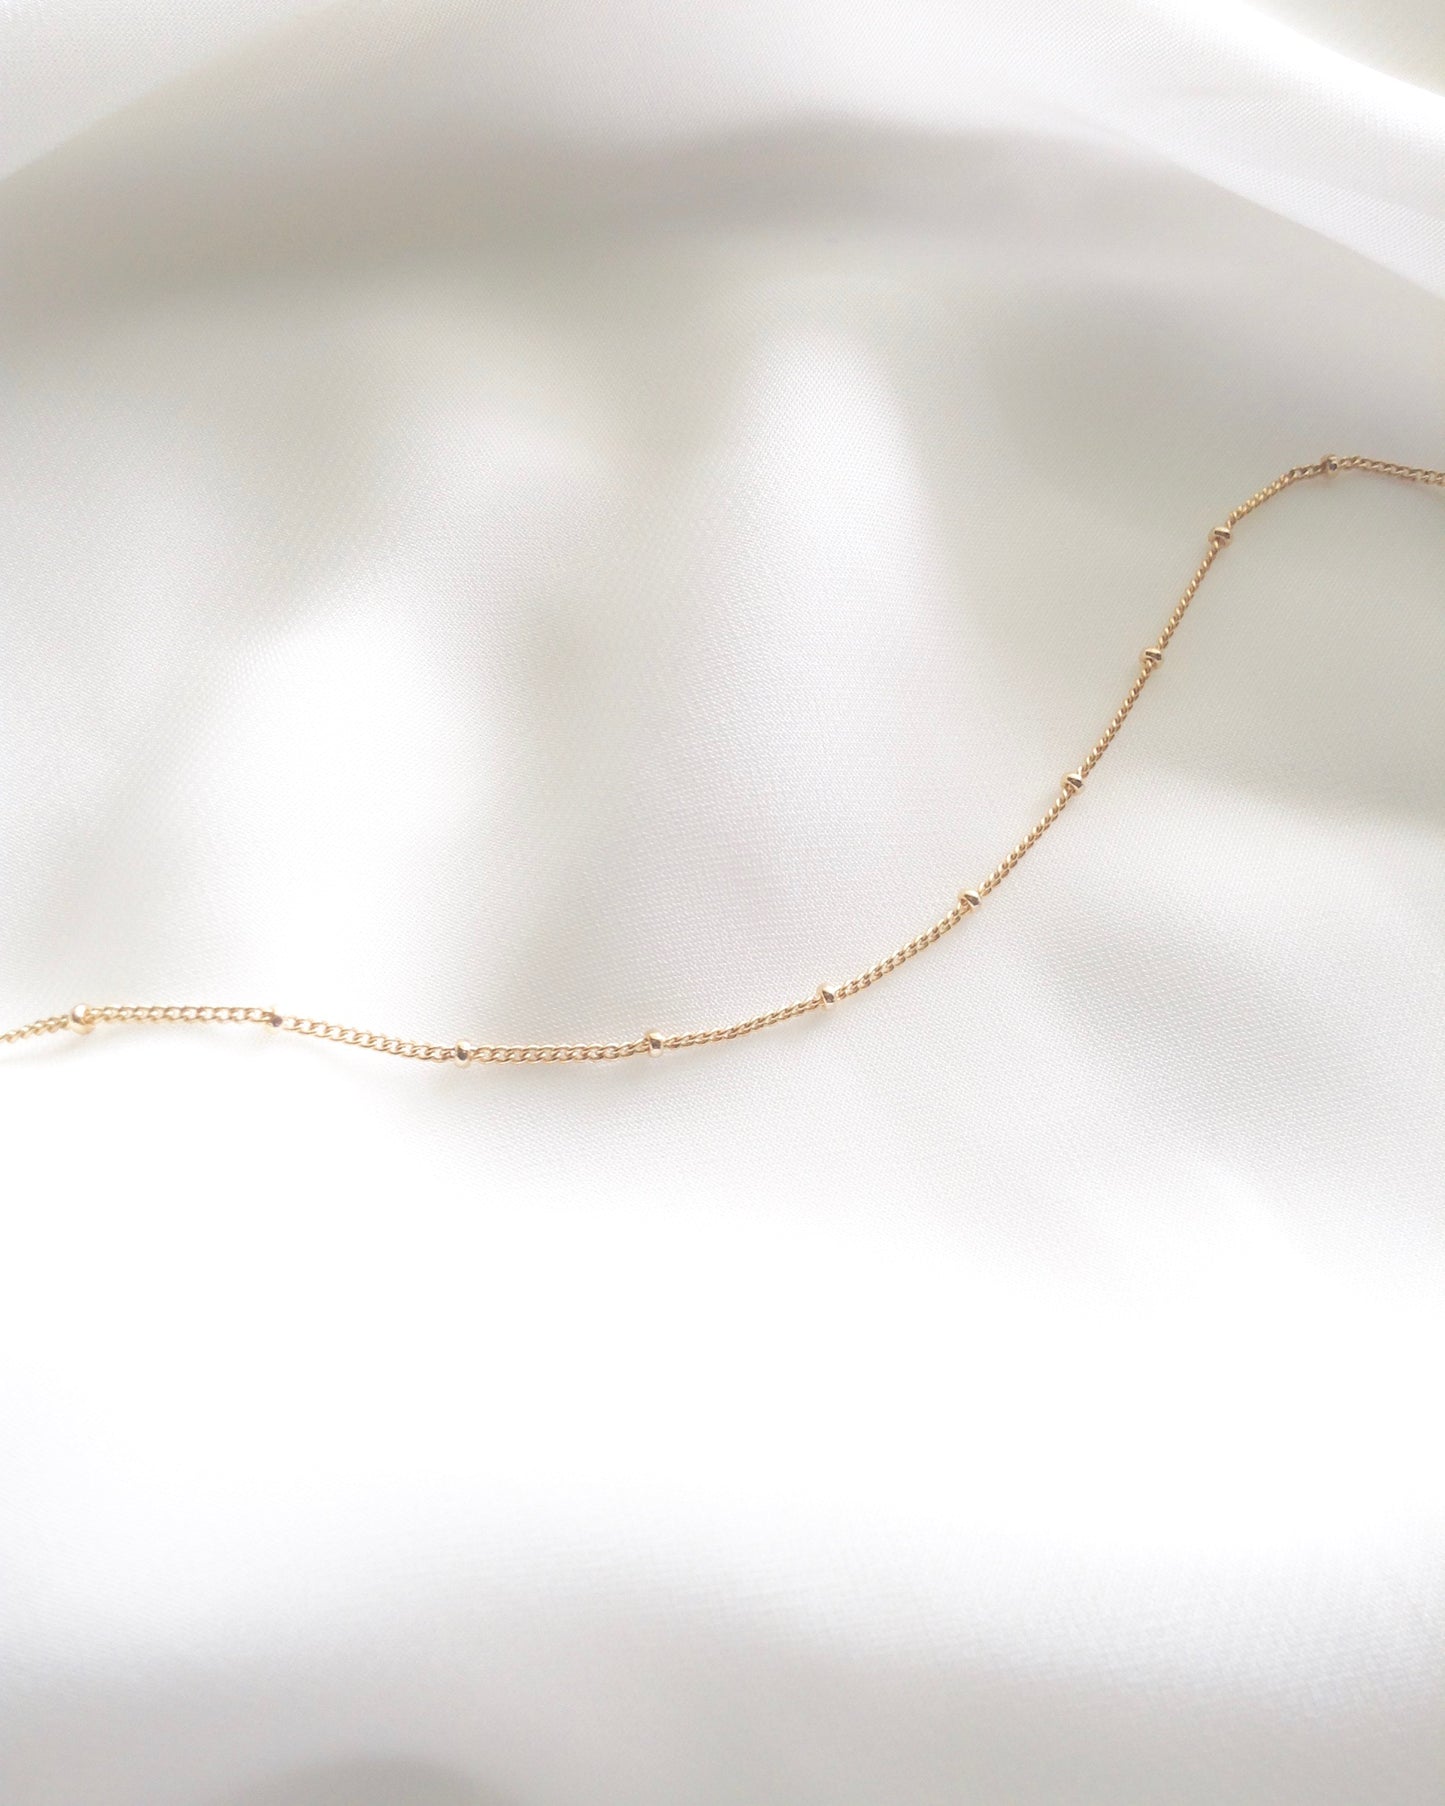 Delicate Thin Chain Bracelet in Gold Filled or Sterling Silver | IB Jewelry